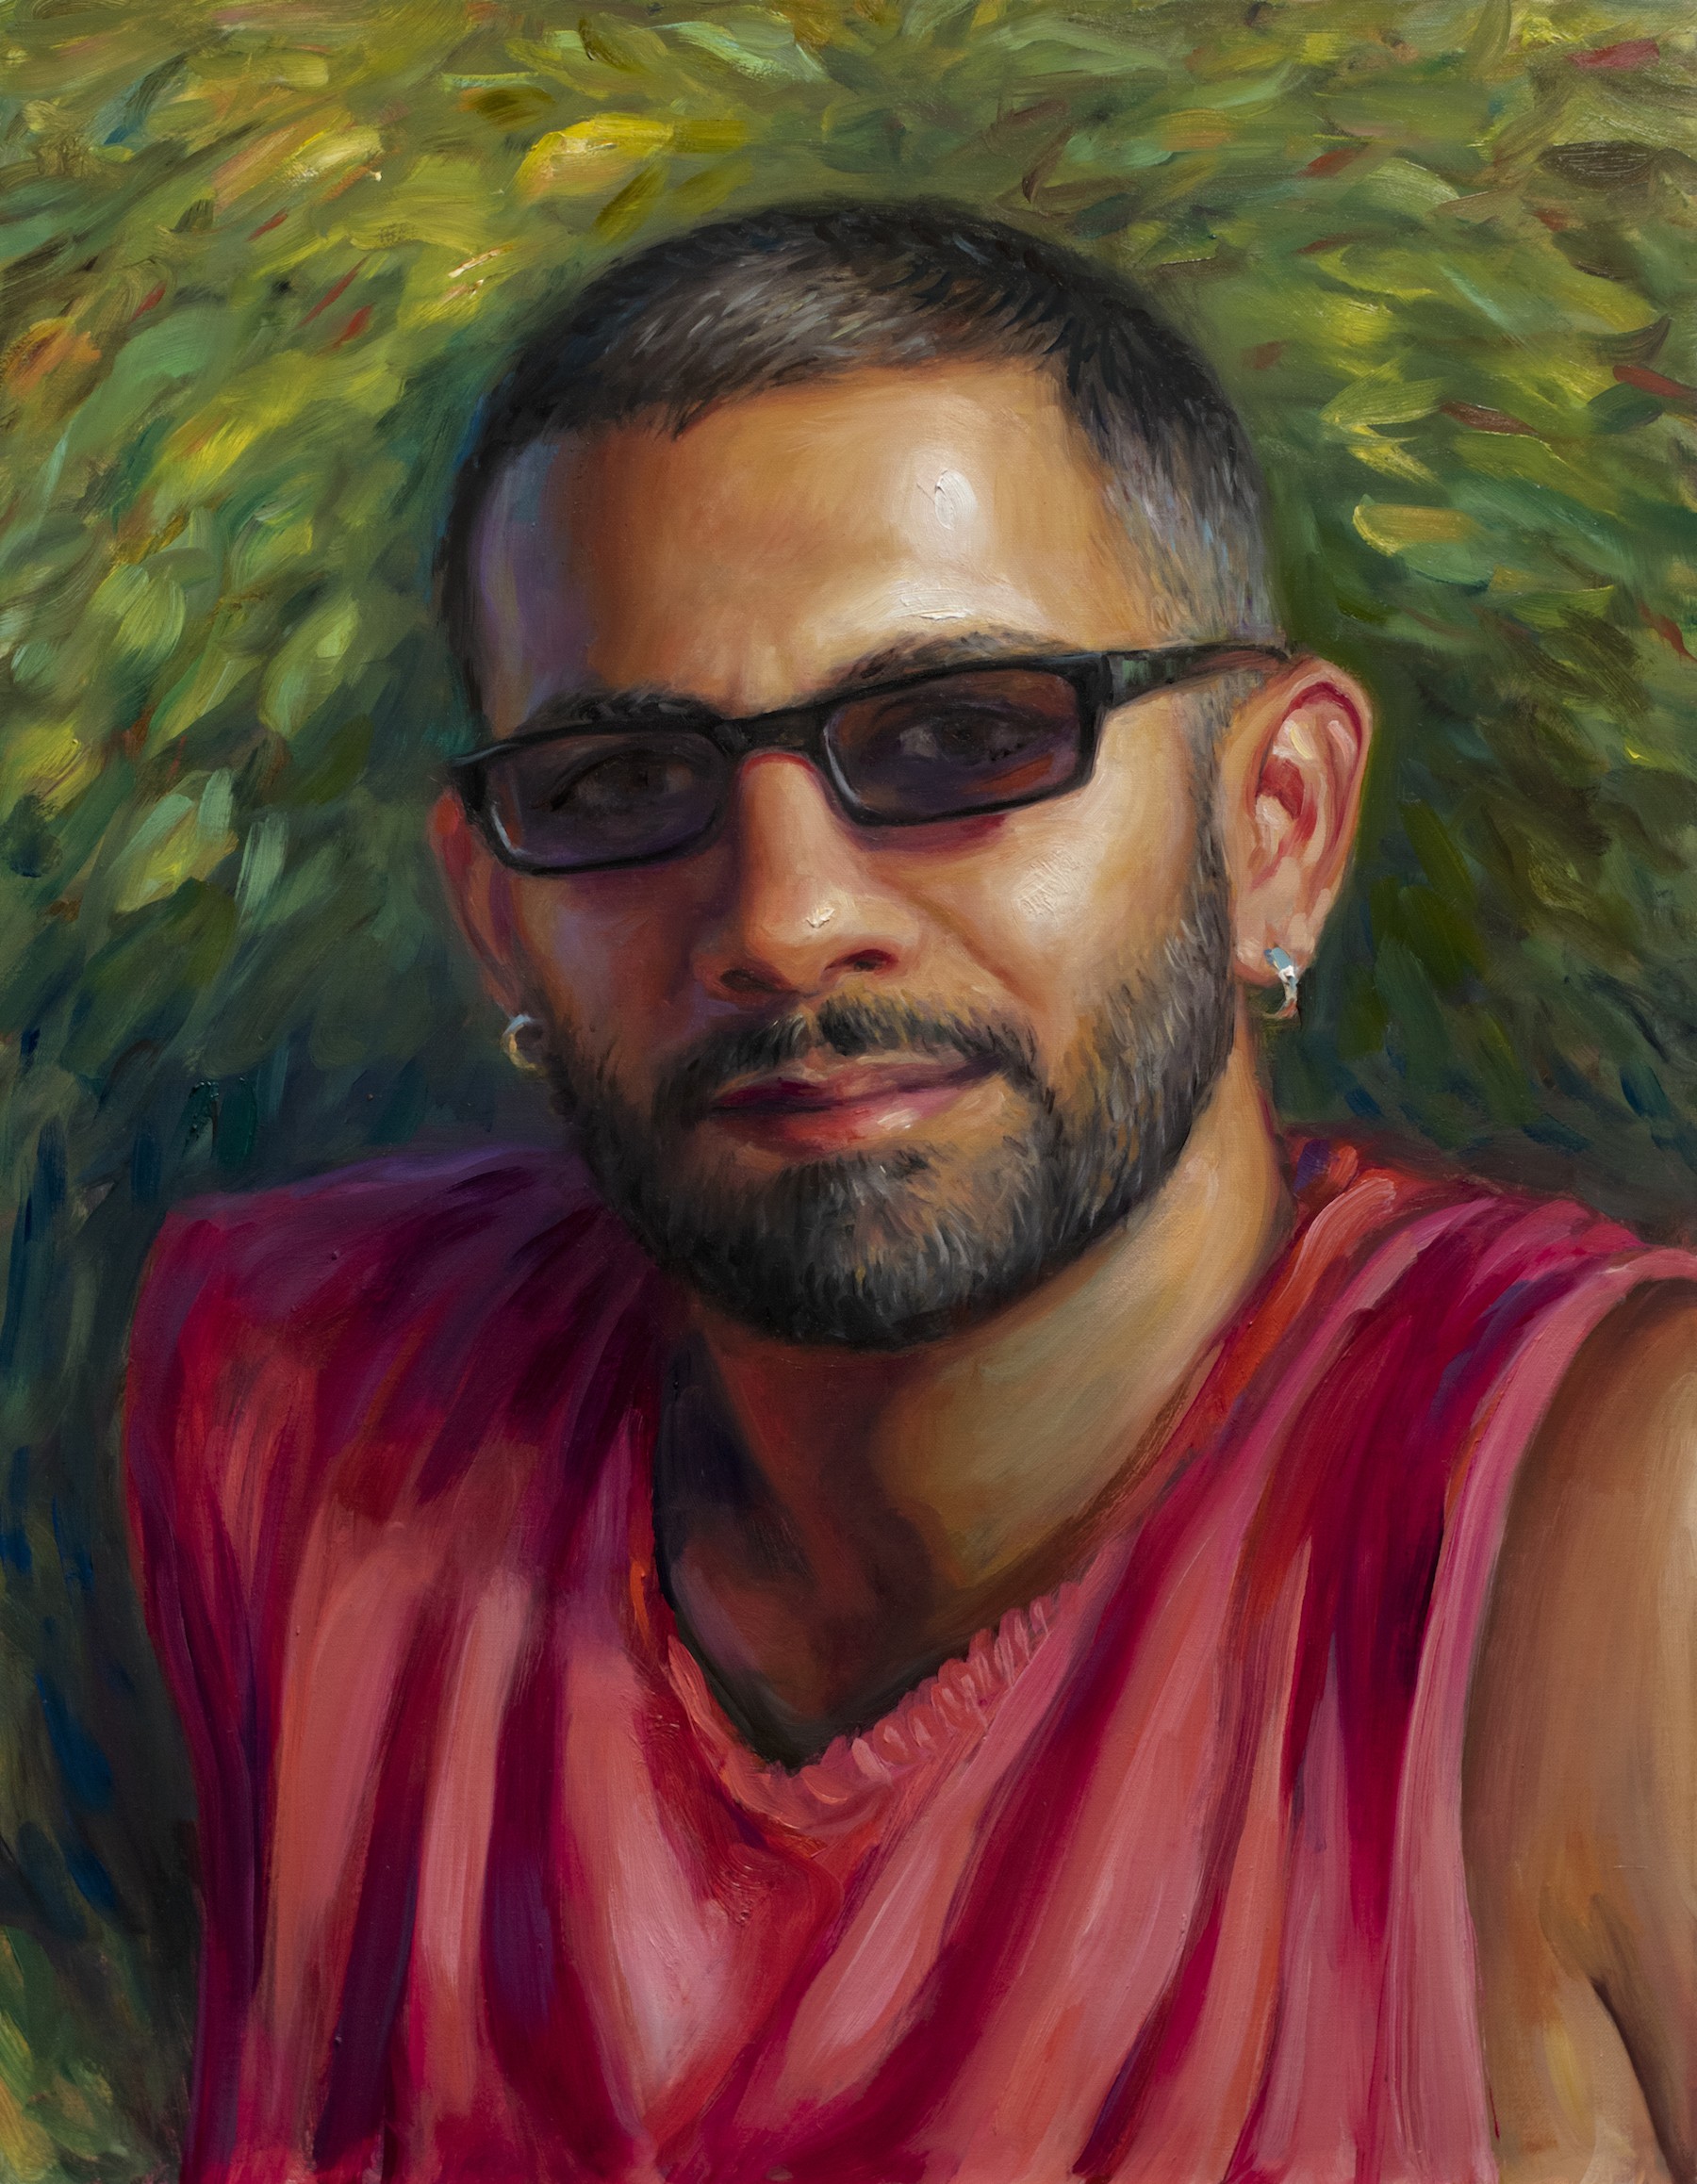 an oil painting on canvas by the painter TM Davy depicts the writer Shiv Kotecha. The painting is cropped tightly to the shoulders and from the chest up. In the painting, Shiv is wearing a read sleeveless shirt, small silver hoops, and narrow rectangular black sunglasses. Behind is loose, gestural greenery in broad daubs of paint that radiate outward directionally.